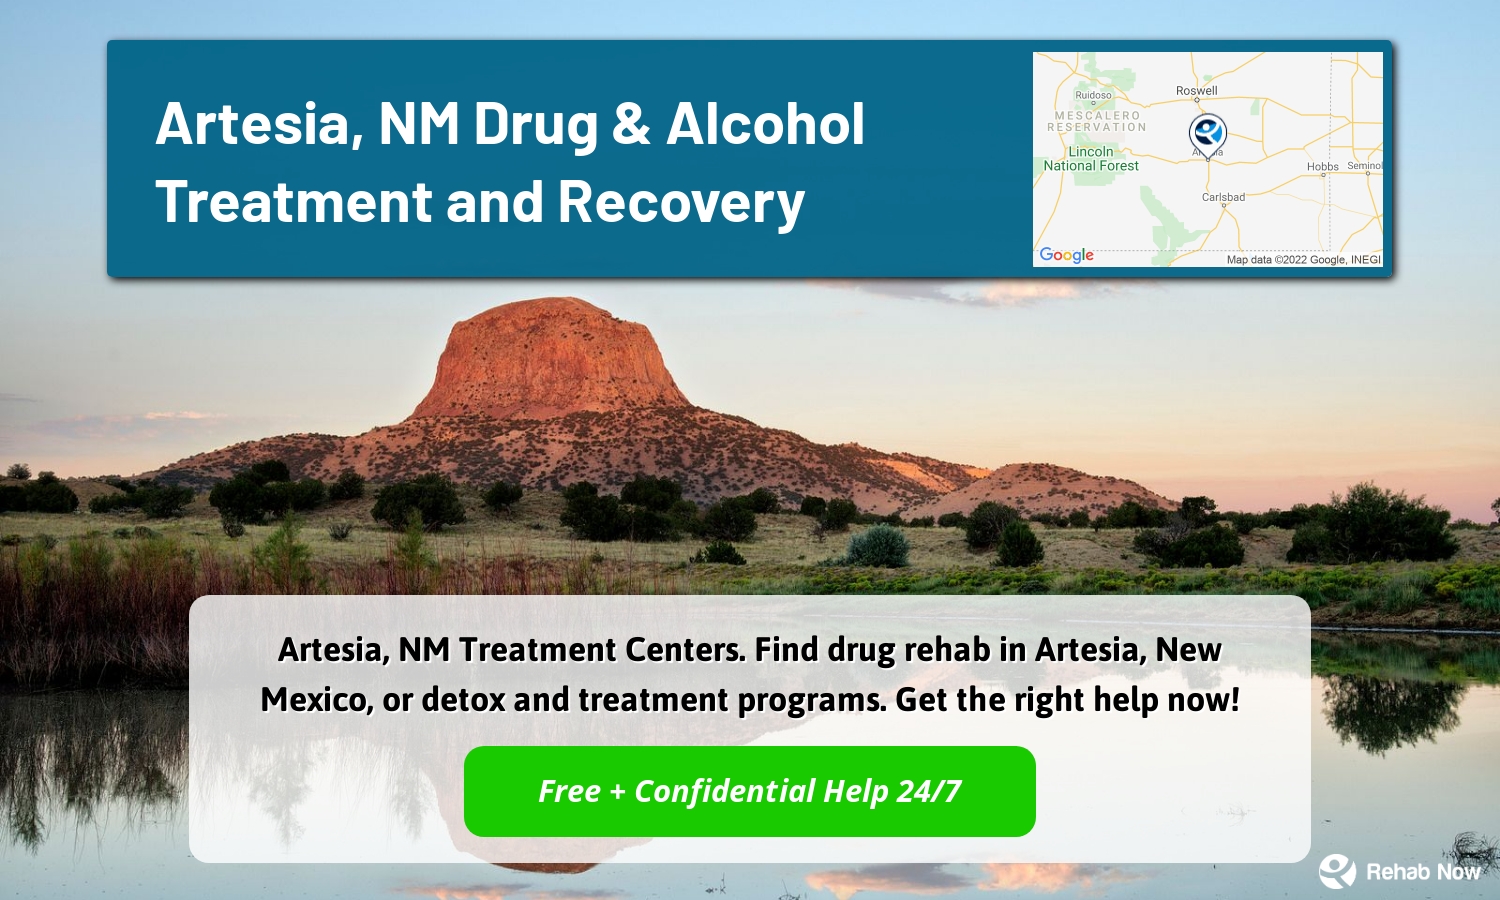 Artesia, NM Treatment Centers. Find drug rehab in Artesia, New Mexico, or detox and treatment programs. Get the right help now!